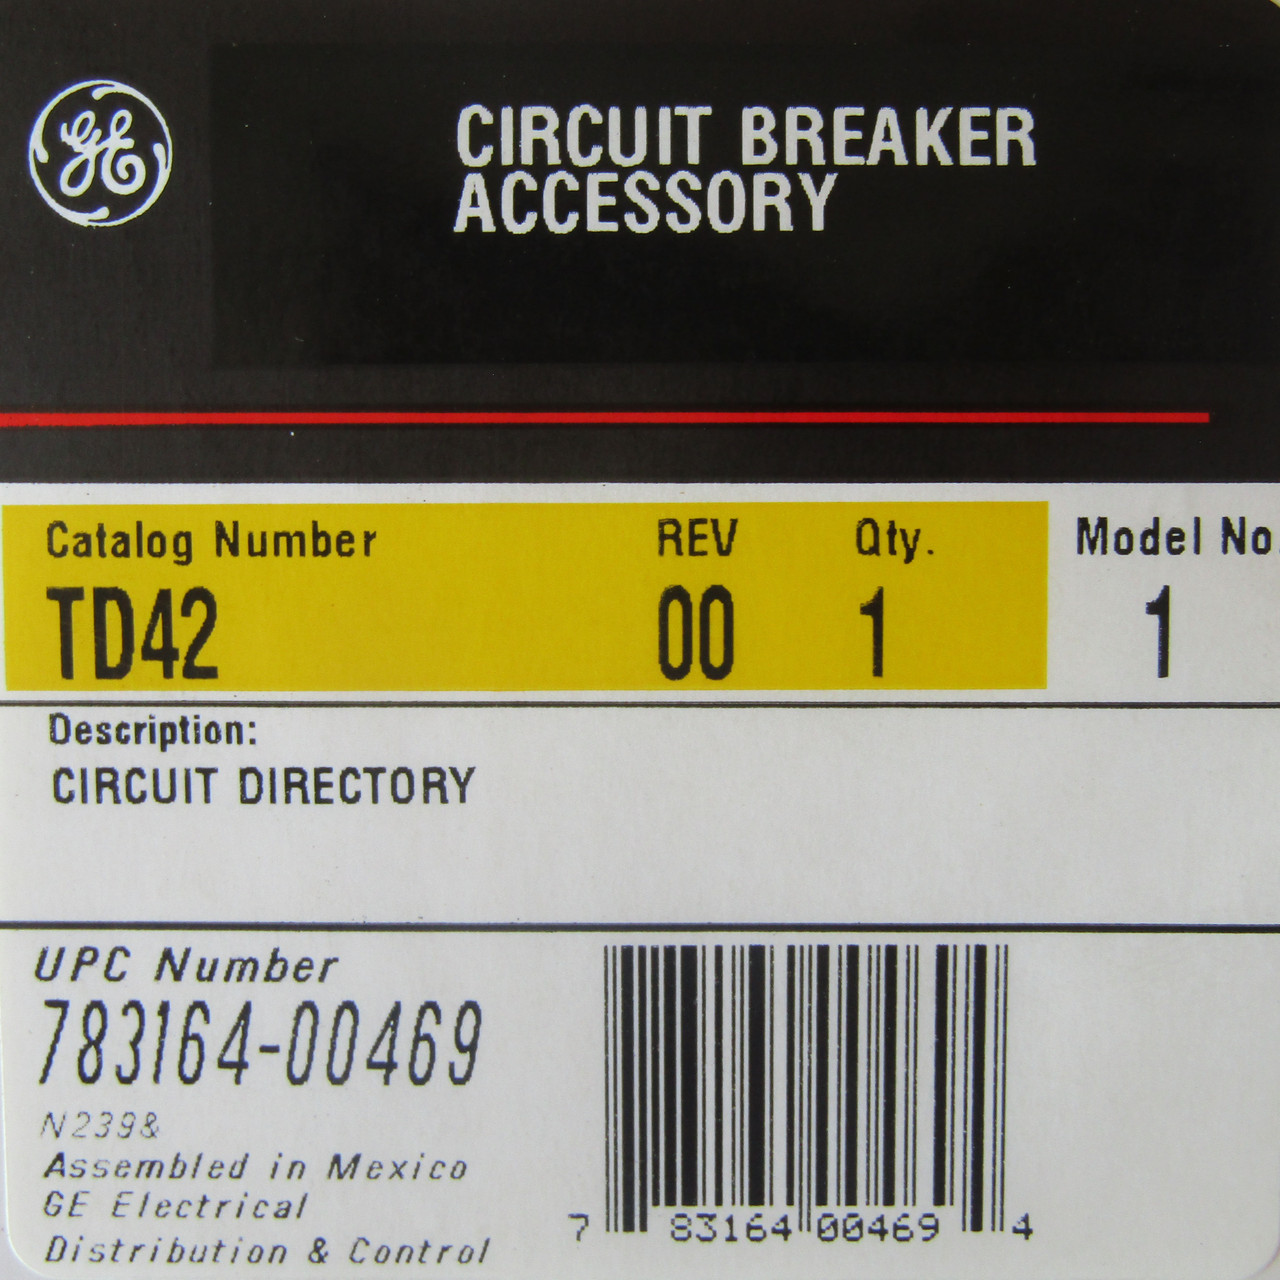 General Electric TD42 Circuit Directory, Model No. 1 - New